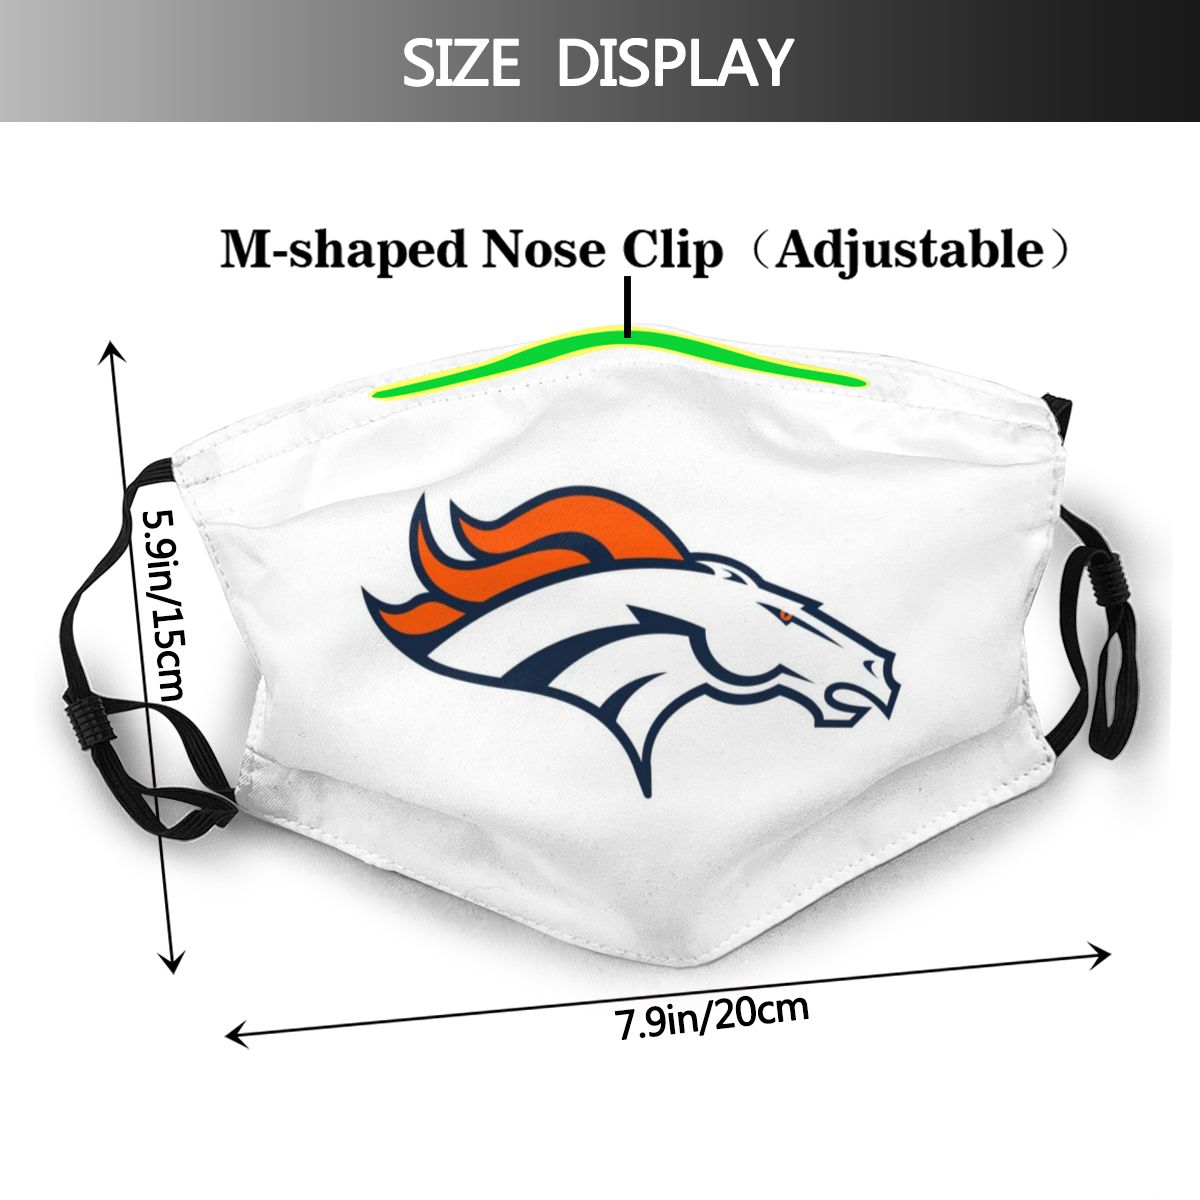 White Print Football Personalized Denver Broncos Adult Dust Mask With Filters PM 2.5